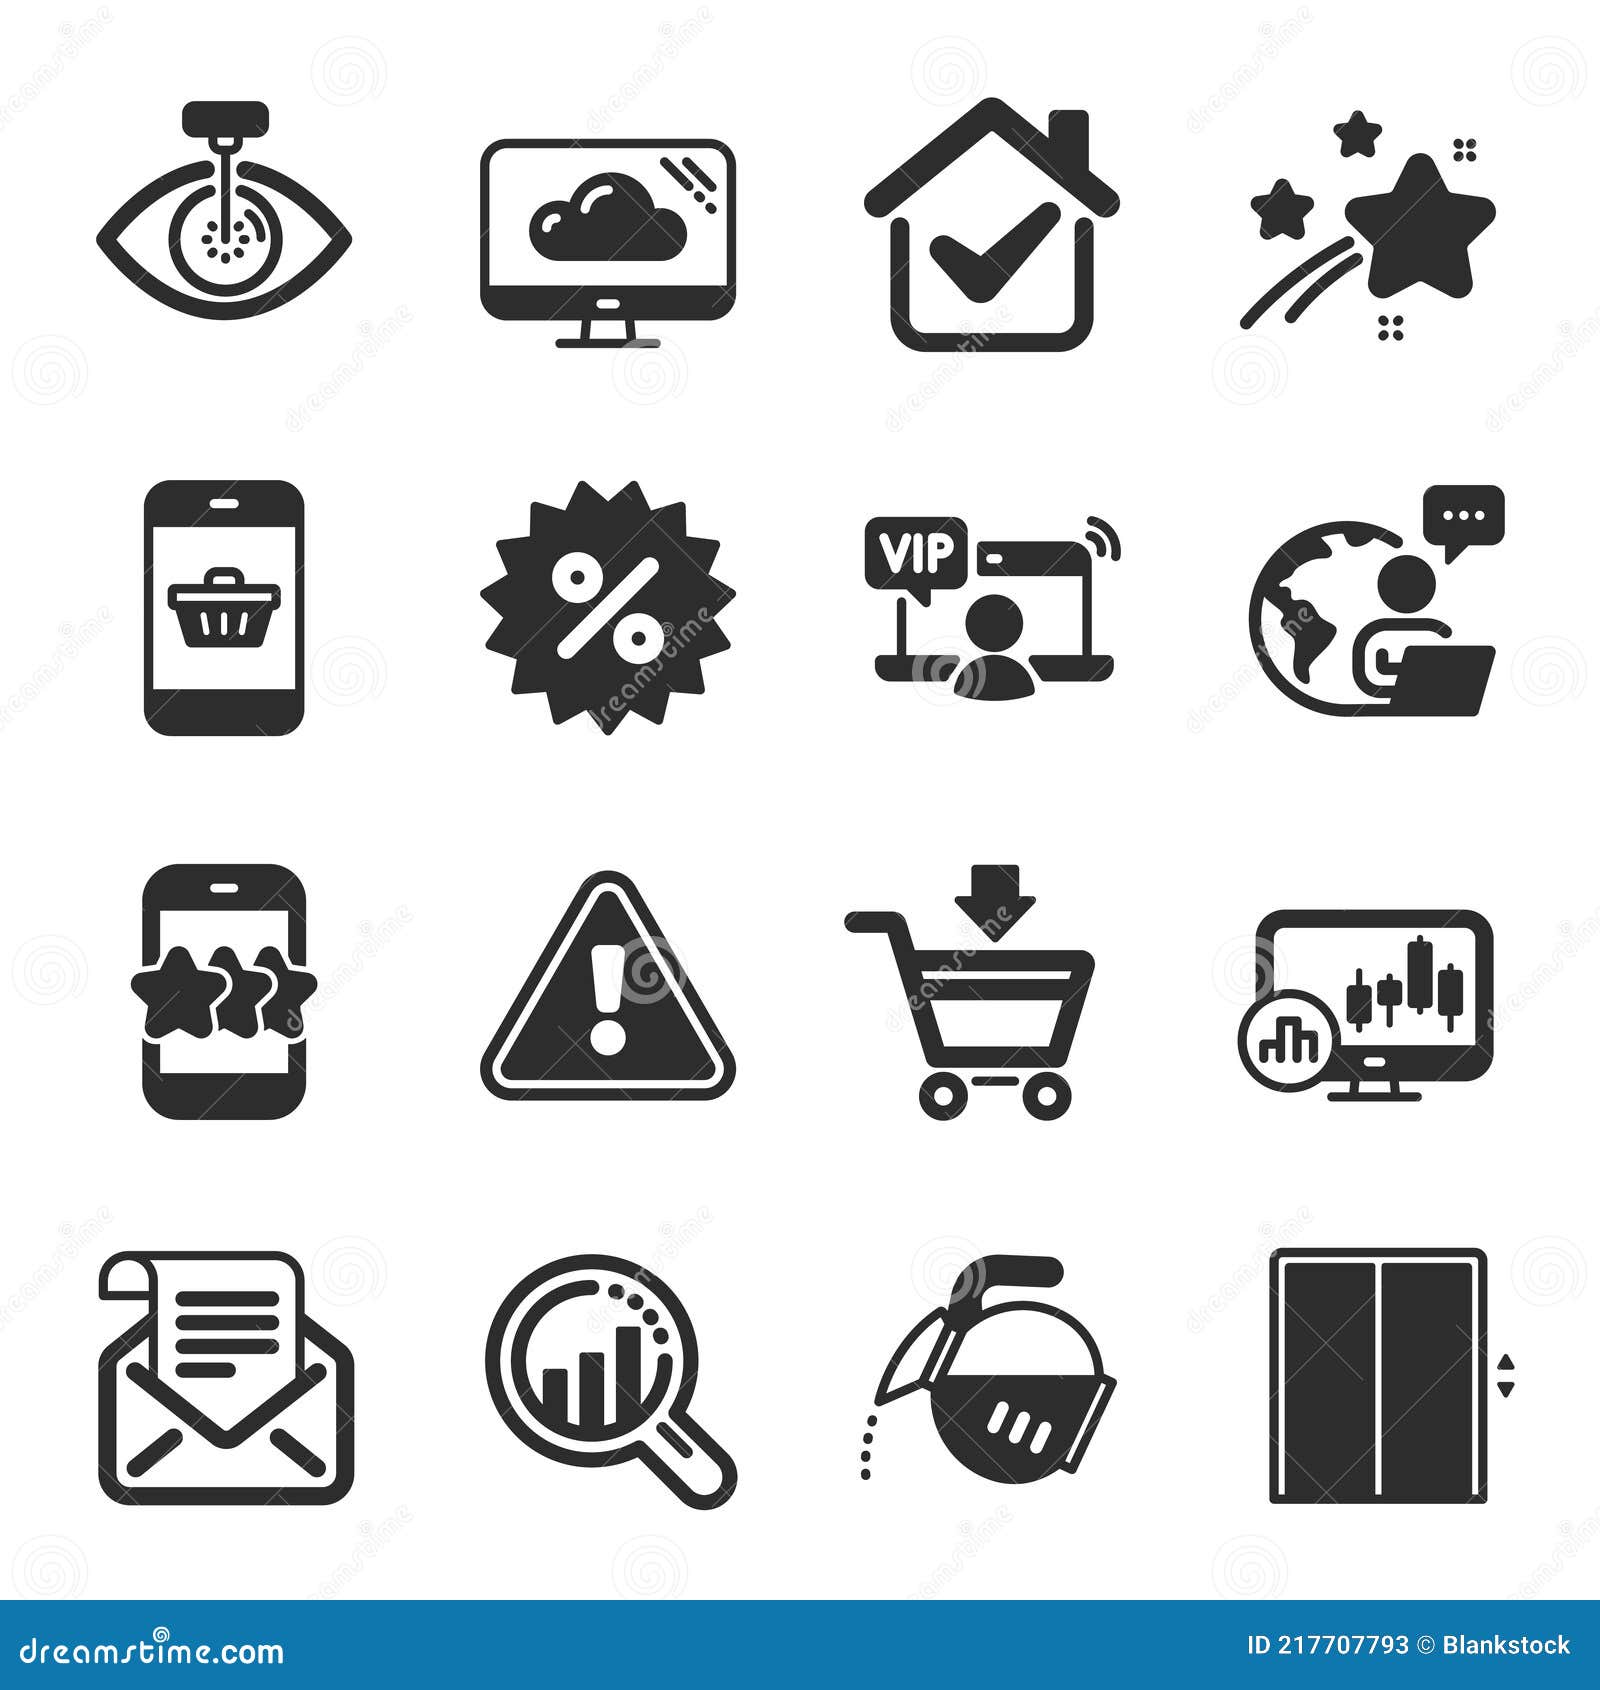 https://thumbs.dreamstime.com/z/set-business-icons-such-as-online-market-candlestick-chart-eye-laser-symbols-vector-star-seo-analysis-discount-signs-vip-access-217707793.jpg